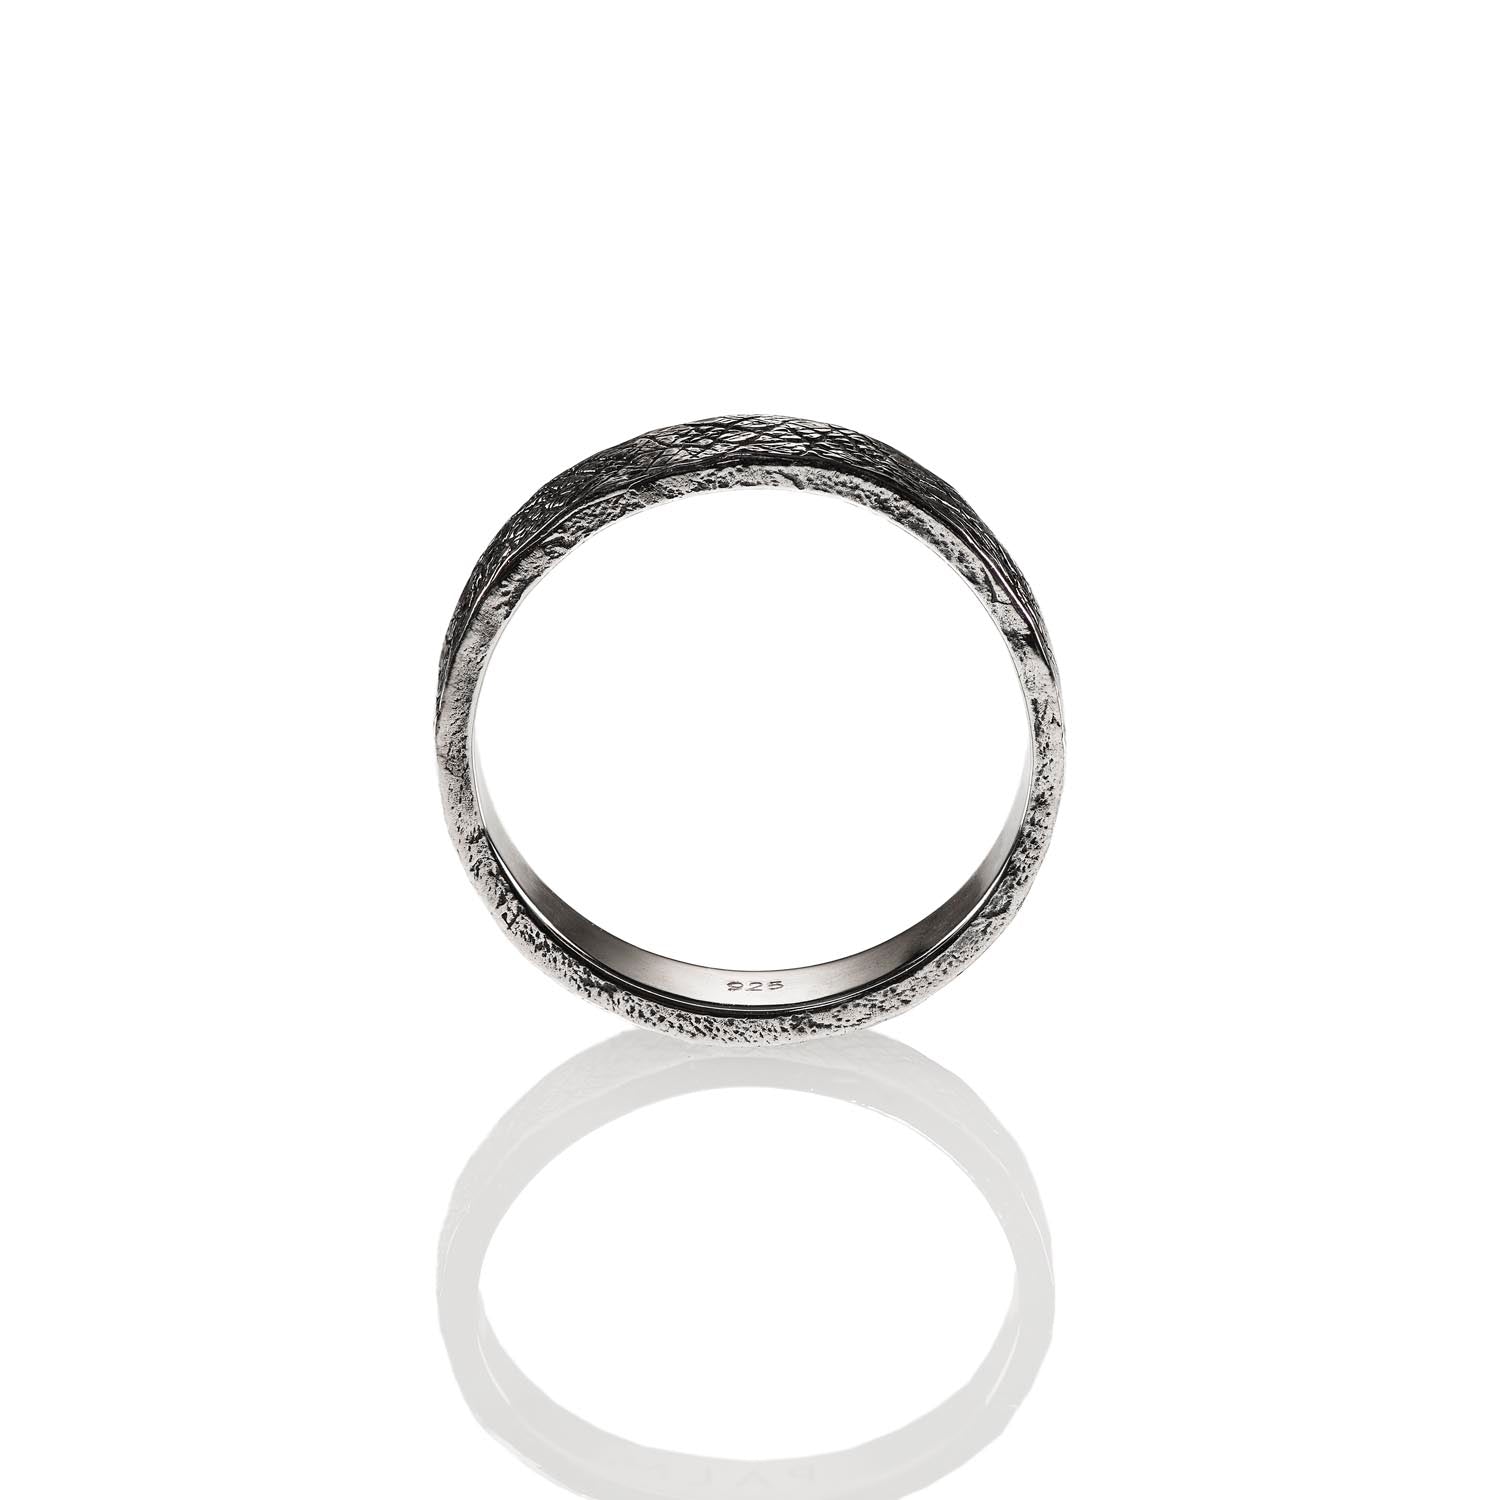 NOX RING MEDIUM. - Minimalistic 925 Silver Ring 5mm - PALM. | Handcrafted Jewelry-